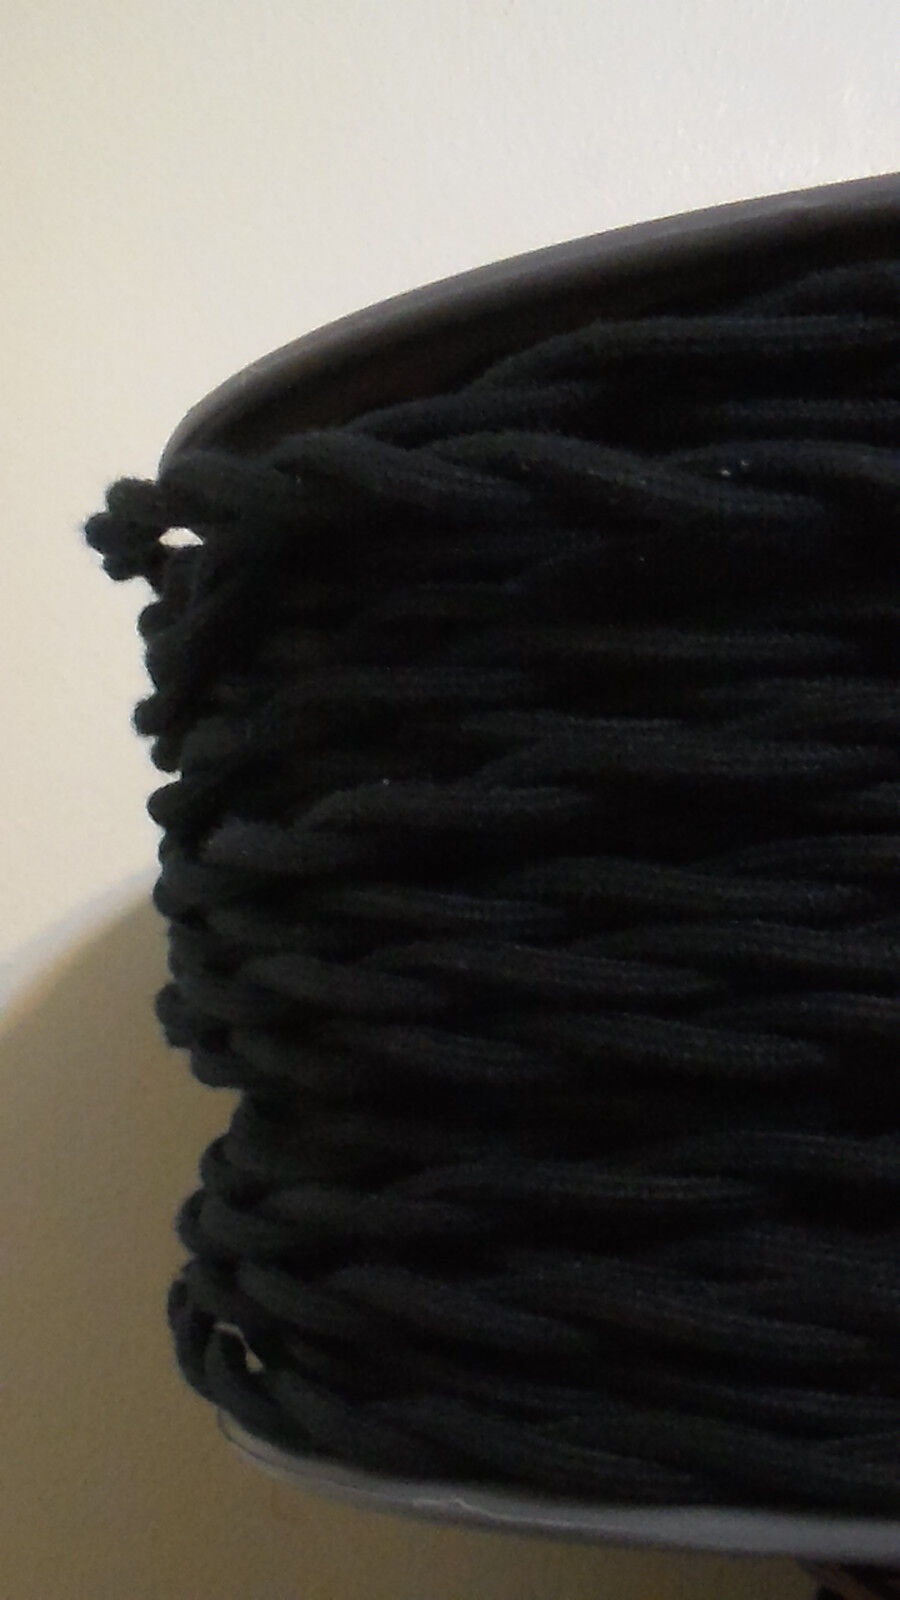 75 Ft. Spool Black Twisted Cotton Covered Lamp Cord Wire Antique Vintage Style 